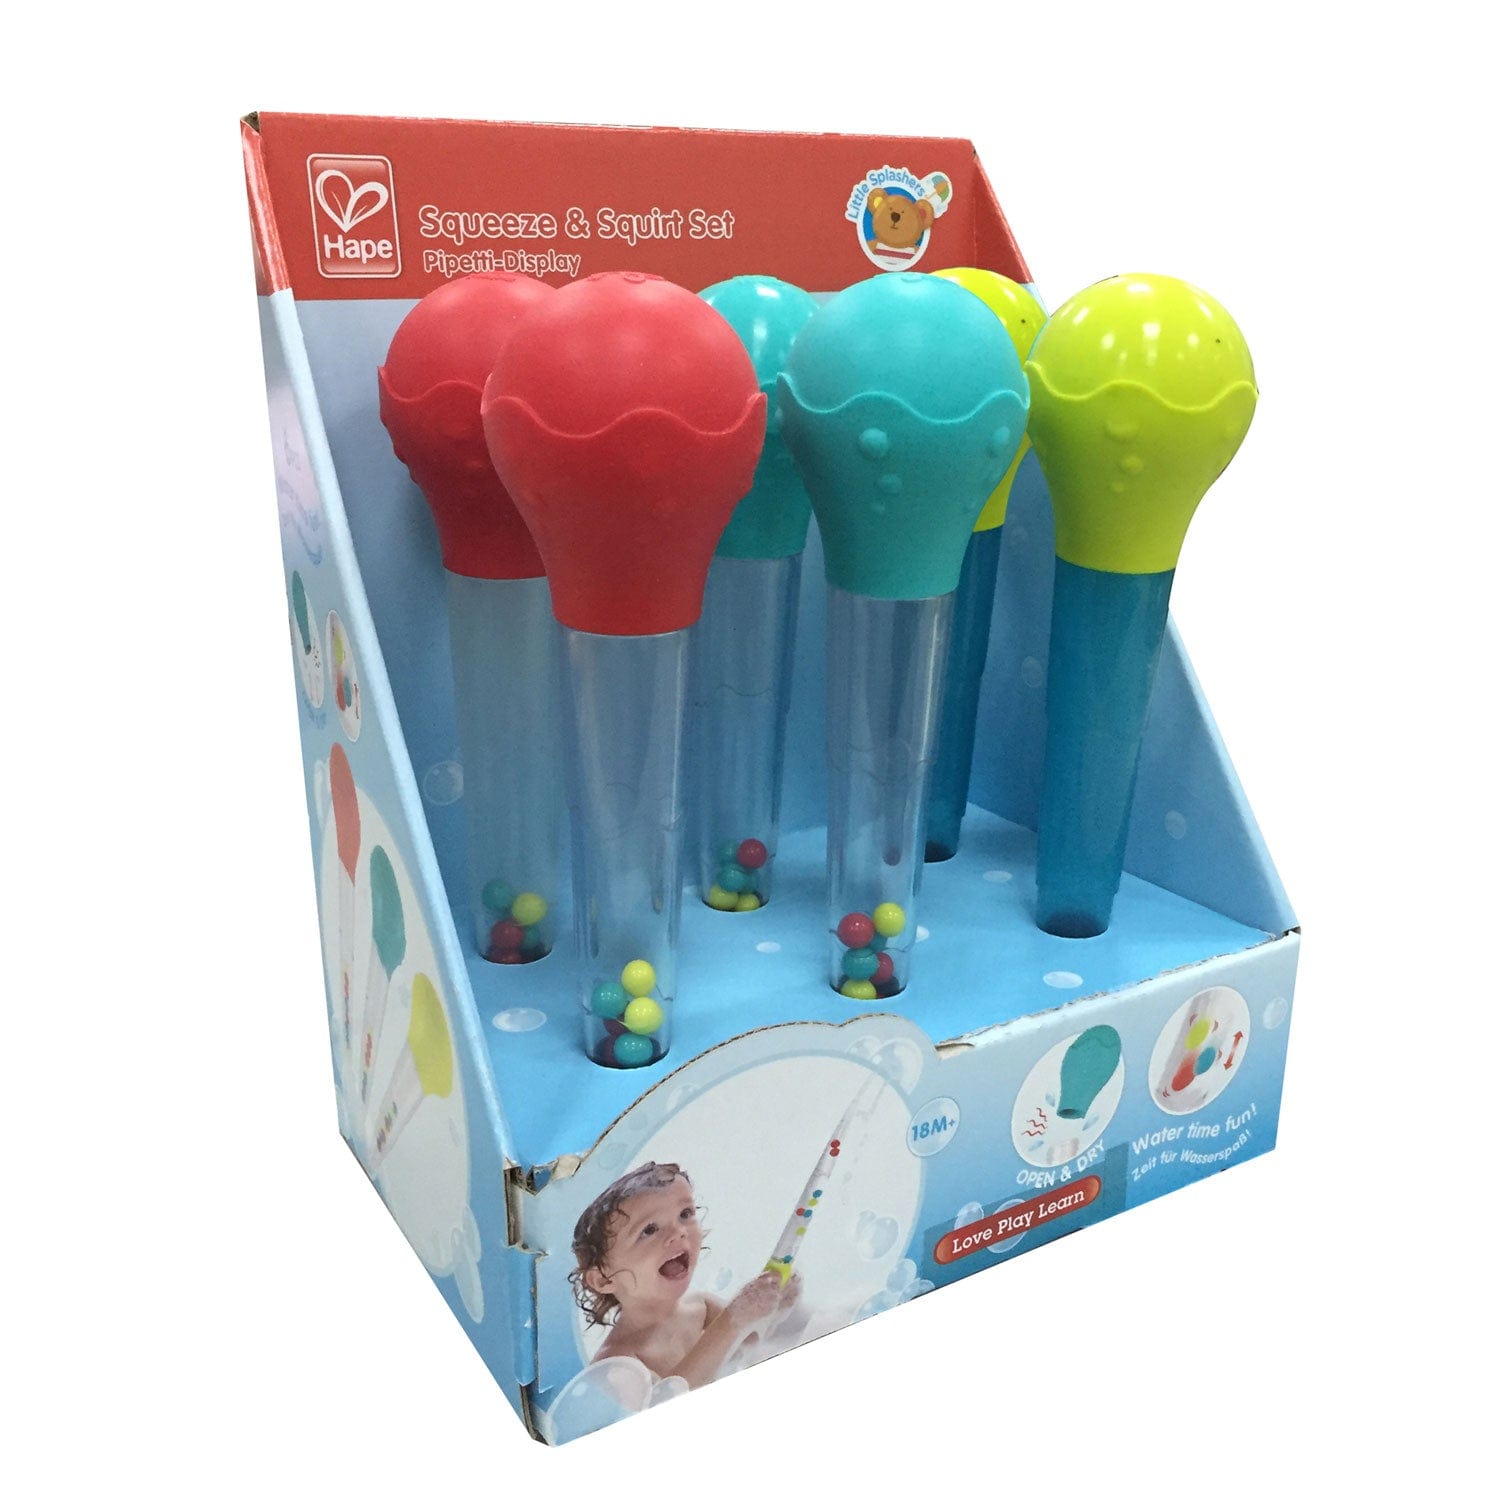 Hape-Squeeze & Squirt Toy - Assorted Styles-E0207-Legacy Toys